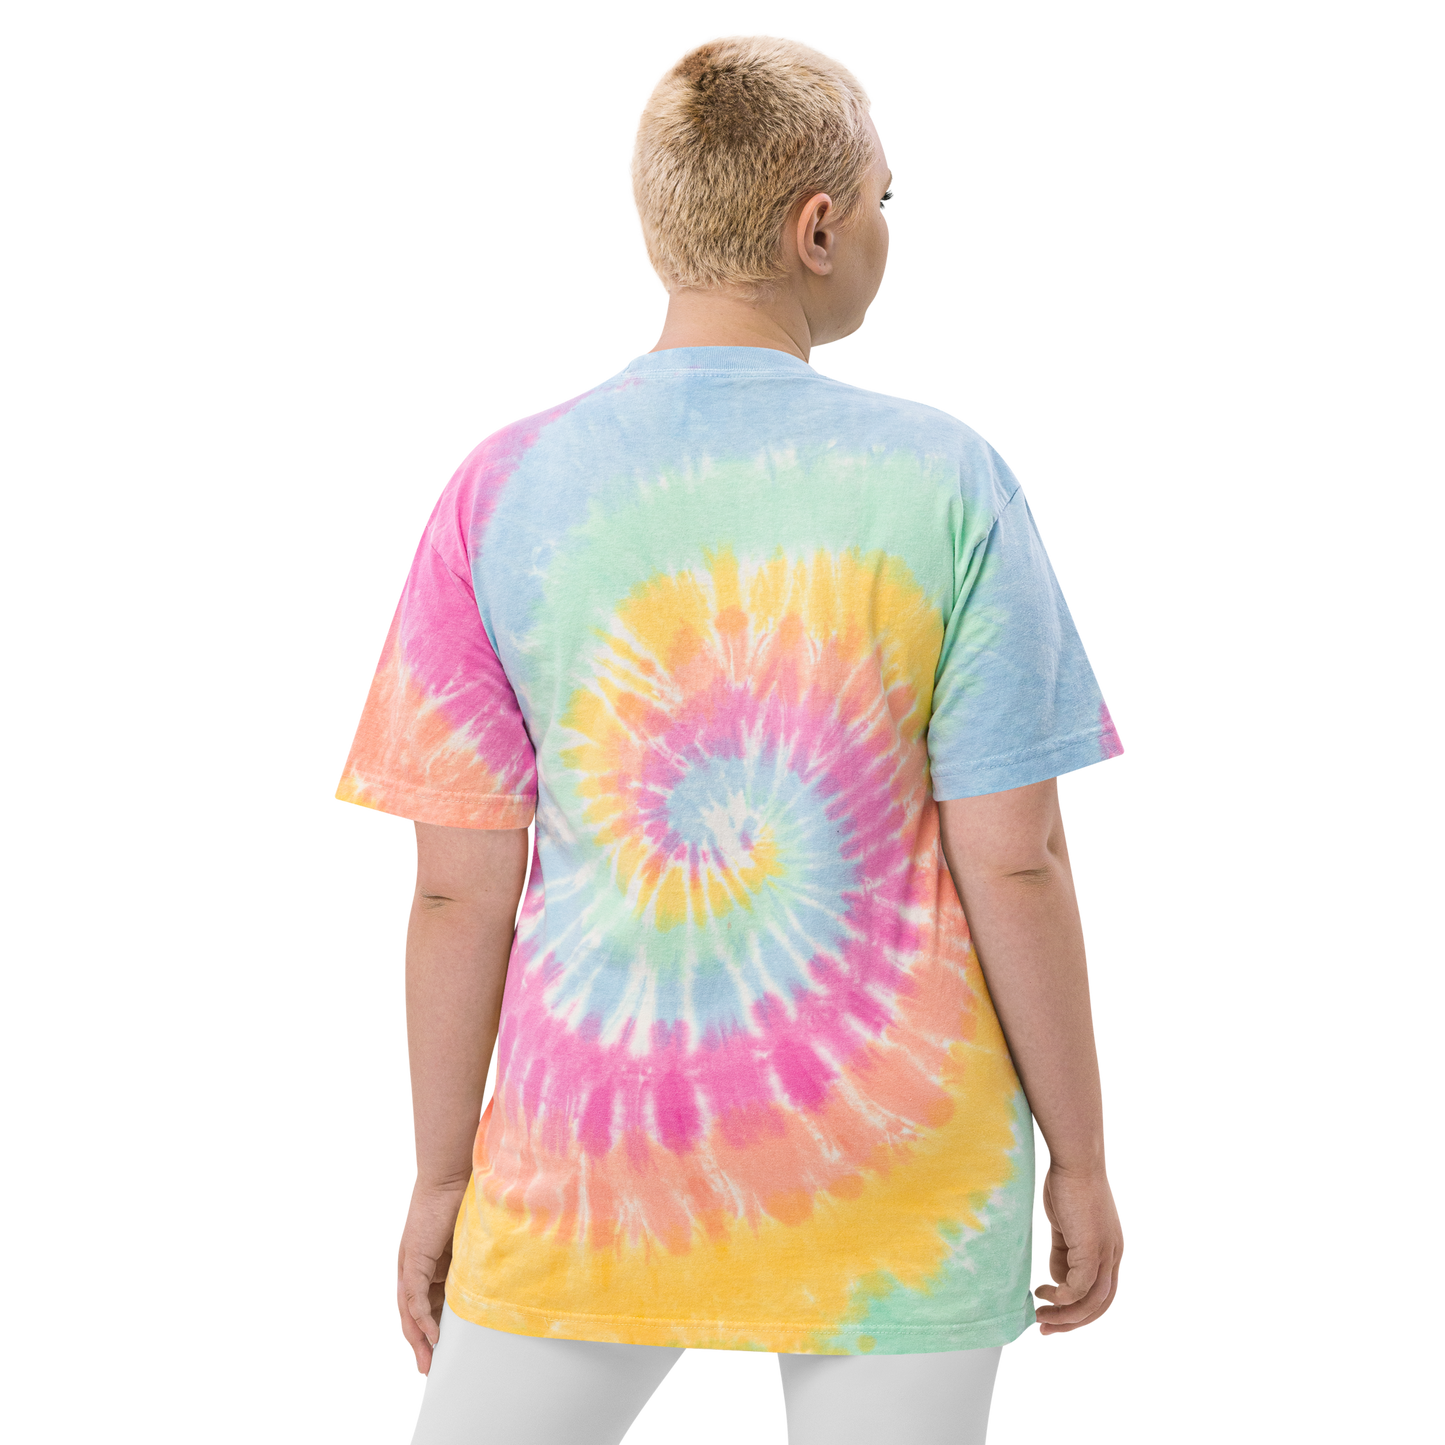 YHM Designs - YFB Iqaluit Oversized Tie-Dye T-Shirt - Crossed-X Design with Airport Code and Vintage Propliner - White Embroidery - Image 12